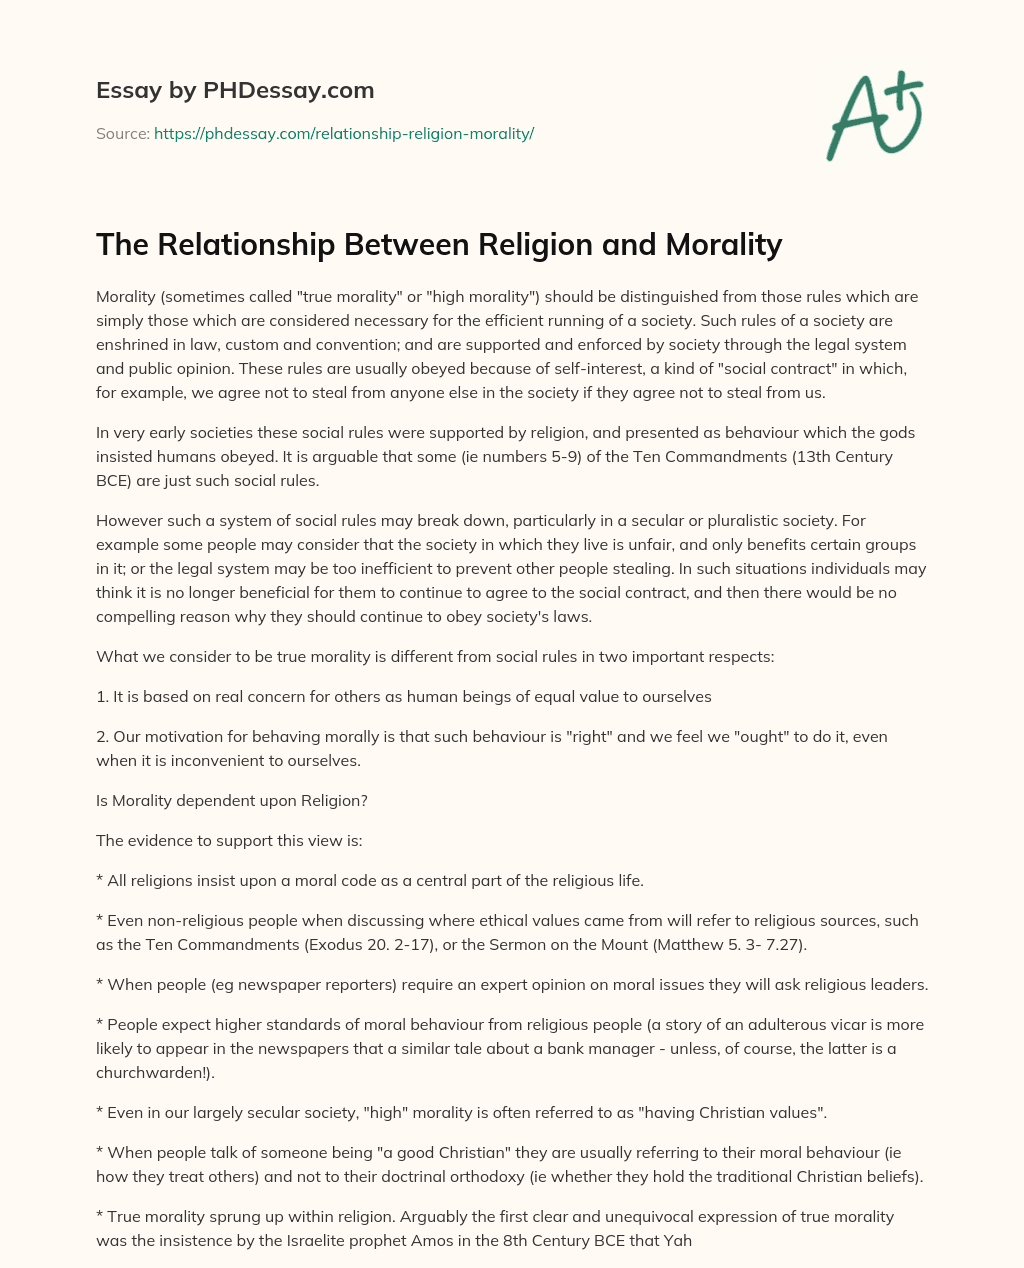 essay on religion influences ethics and morality